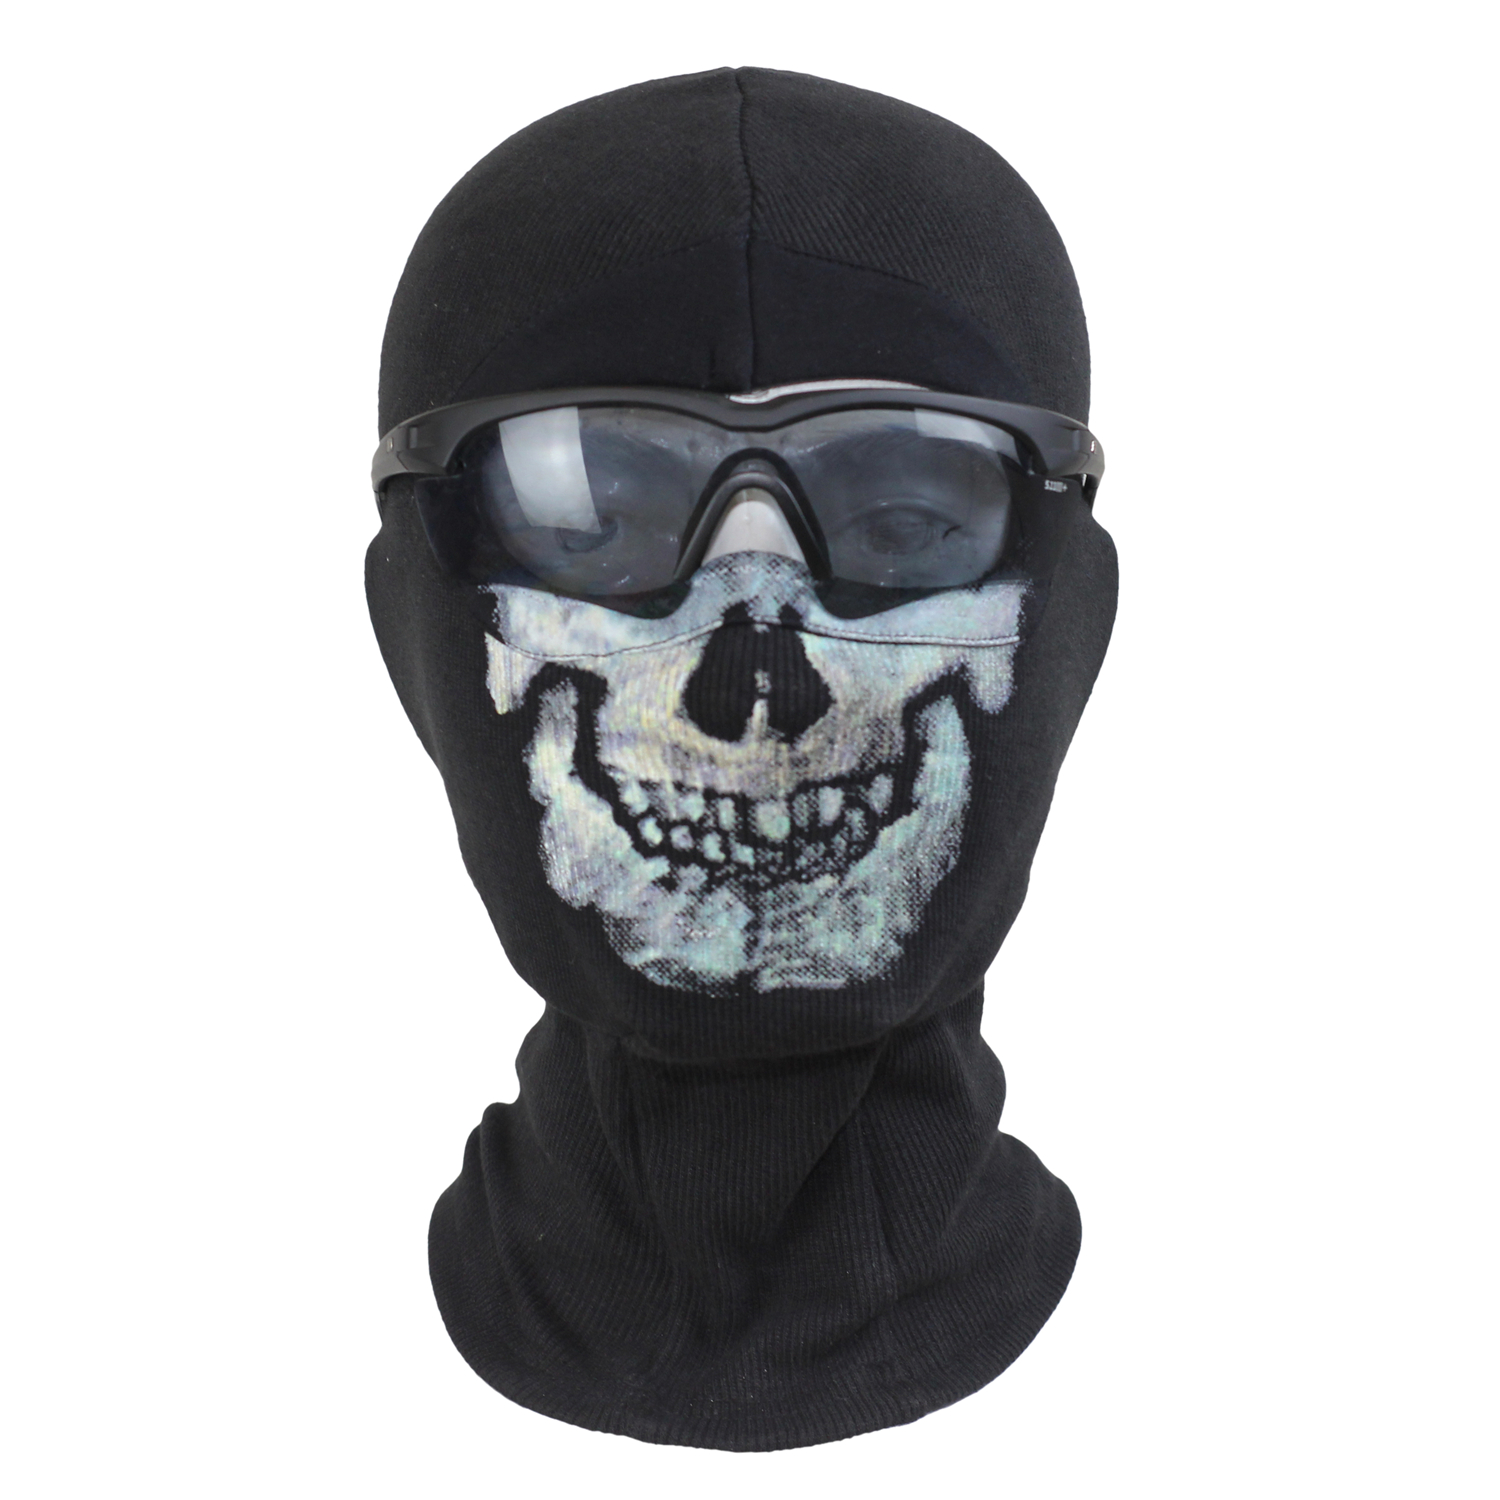 MWII GHOST FACE MASK – Ghost Ski Mask